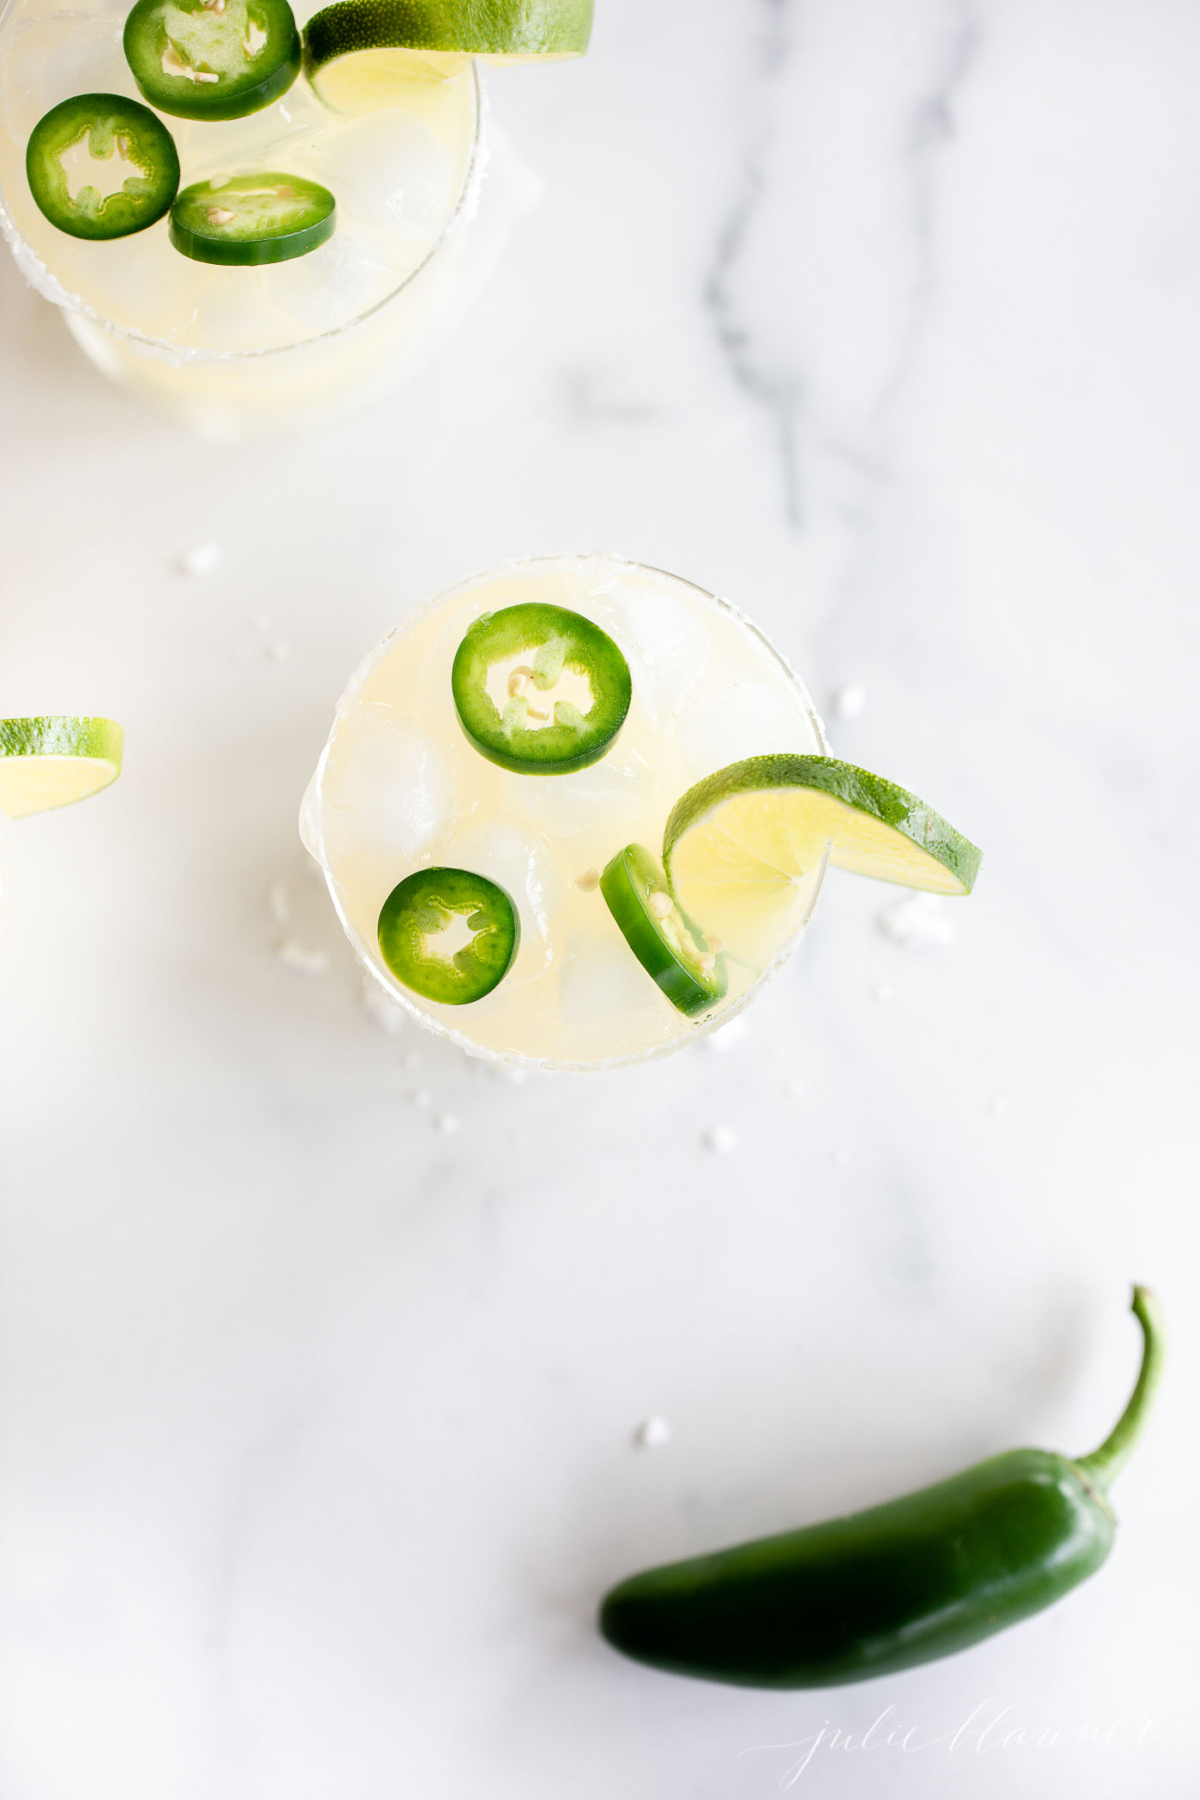 Jalapeno margarita with lime and jalapeno is a delicious twist on the classic Margarita. This spicy cocktail packs a punch with the heat of jalapenos, balanced out